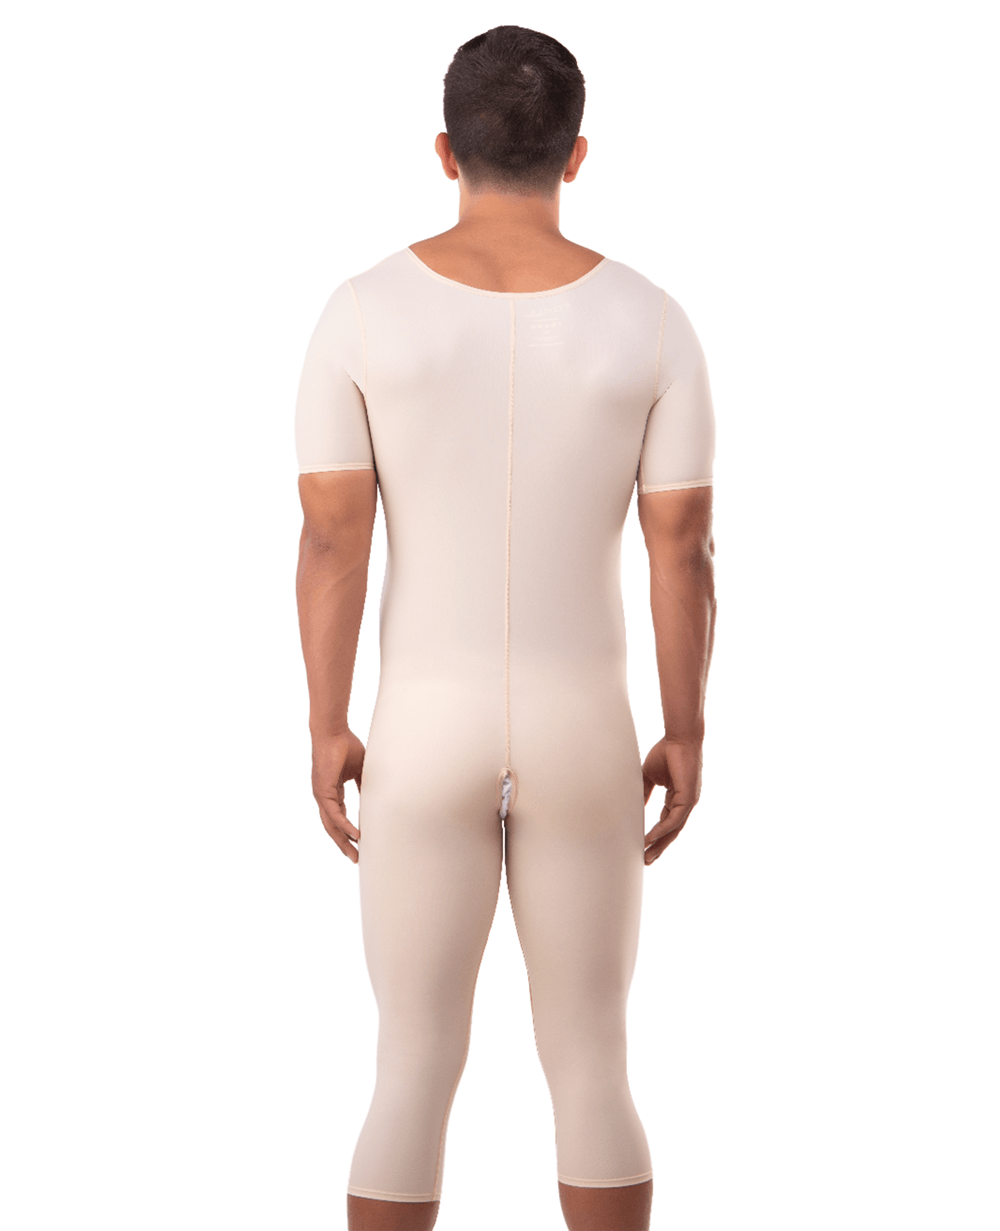 Male Full Body Below the Knee Length Abdominal Cosmetic Surgery Compression  Garment with Zipper (Sleeveless) (MG02-BK)